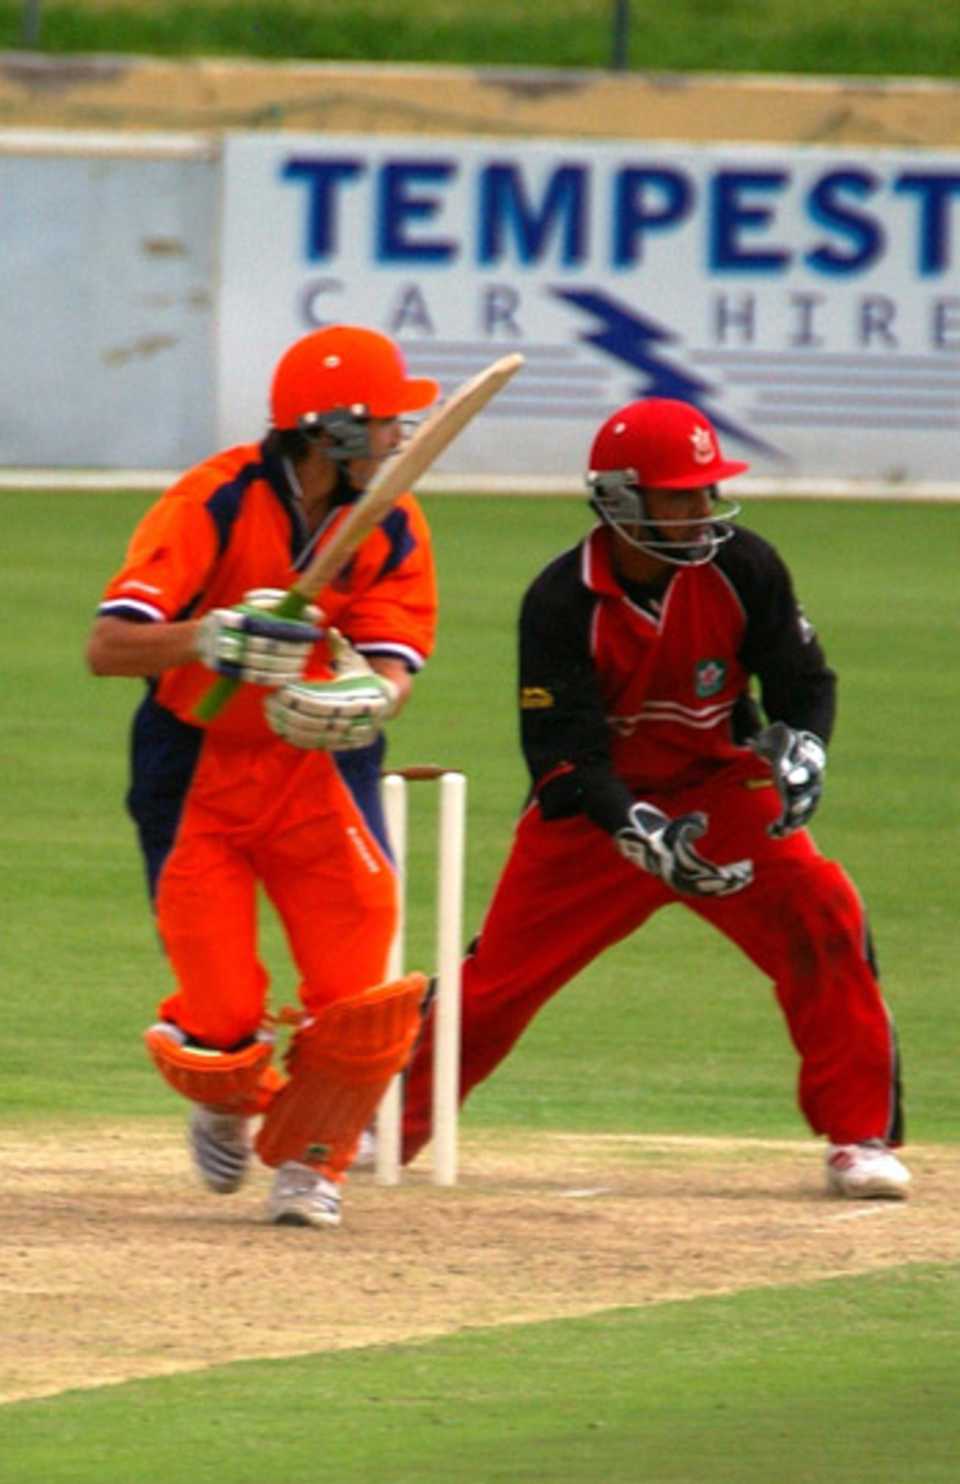 Billy Stelling works to leg, Canada v Netherlands, 5th match, ICC Tri-Series, Benoni, December 1, 2006